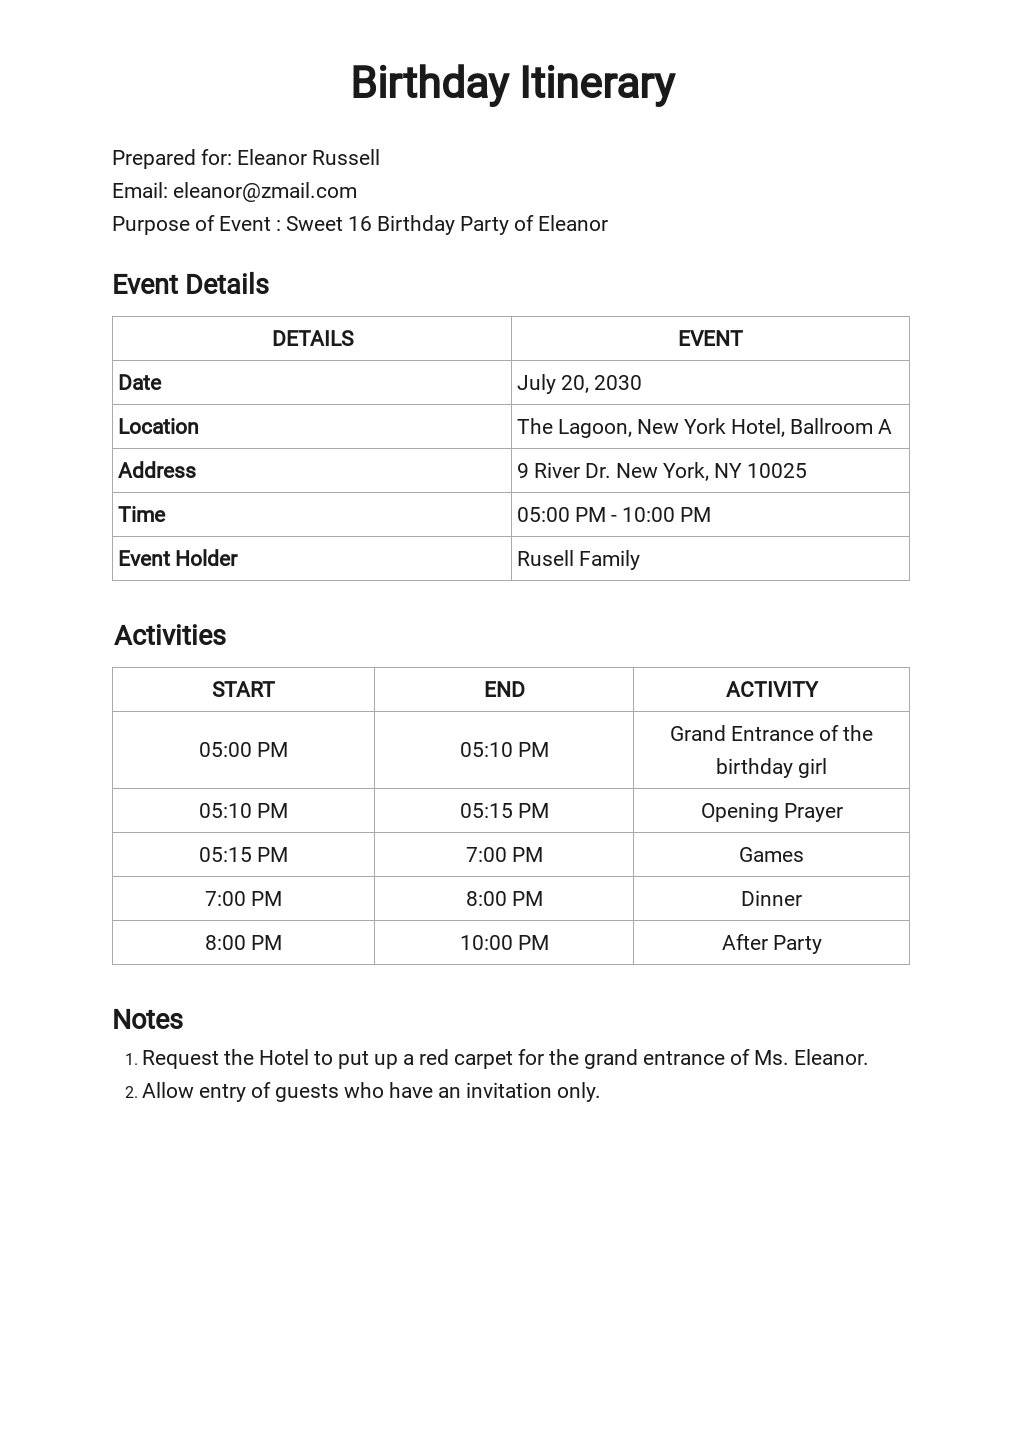 Birthday Itinerary Template [Free PDF] Word (DOC) Apple (MAC) Pages